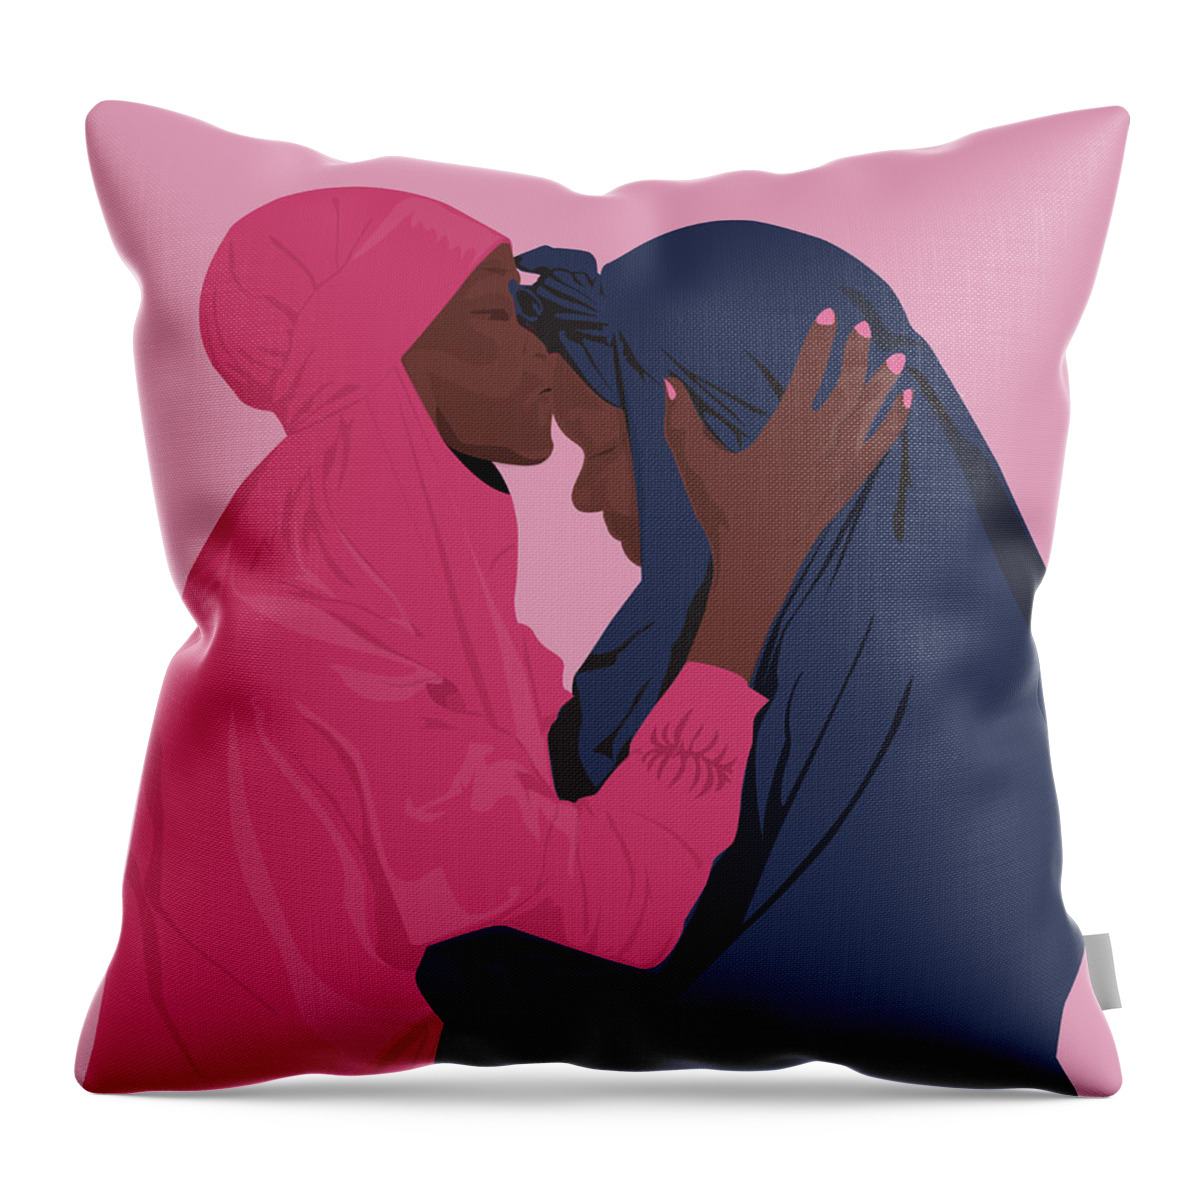 Islam Throw Pillow featuring the digital art My Sweet Umi by Scheme Of Things Graphics